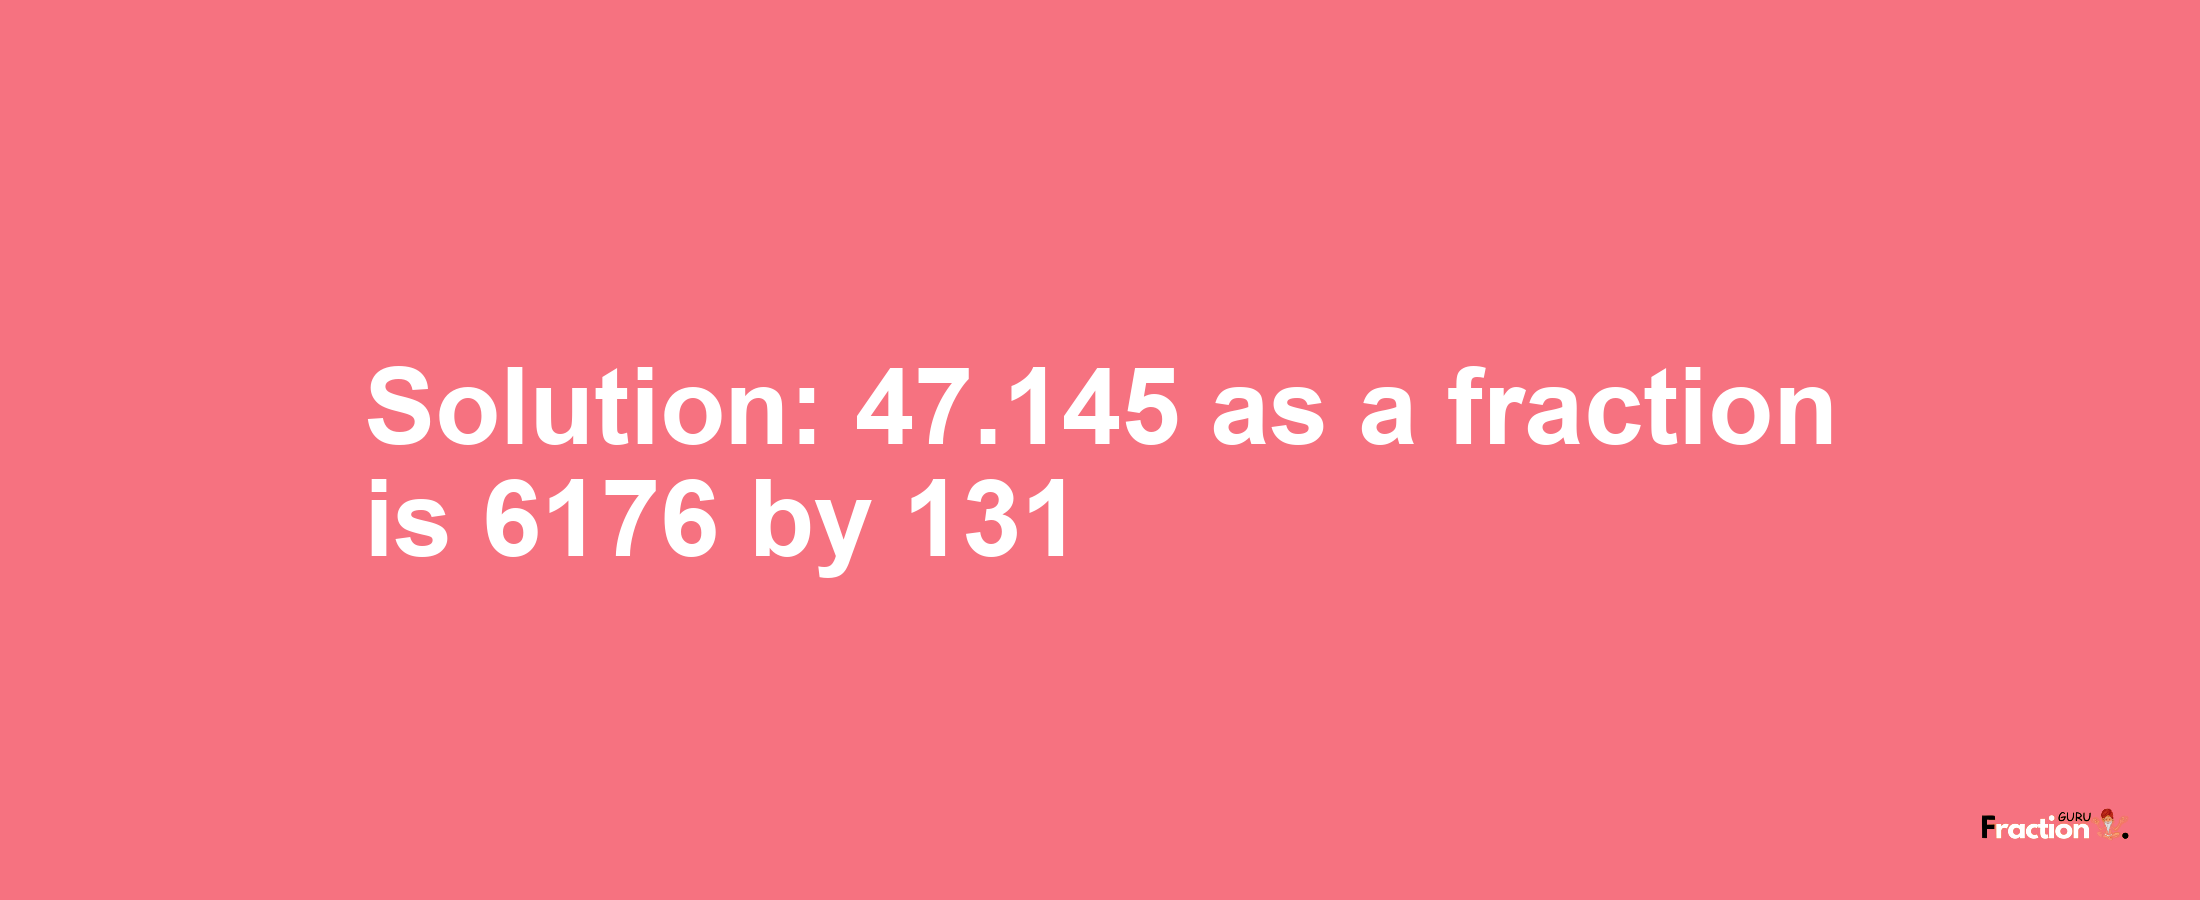 Solution:47.145 as a fraction is 6176/131